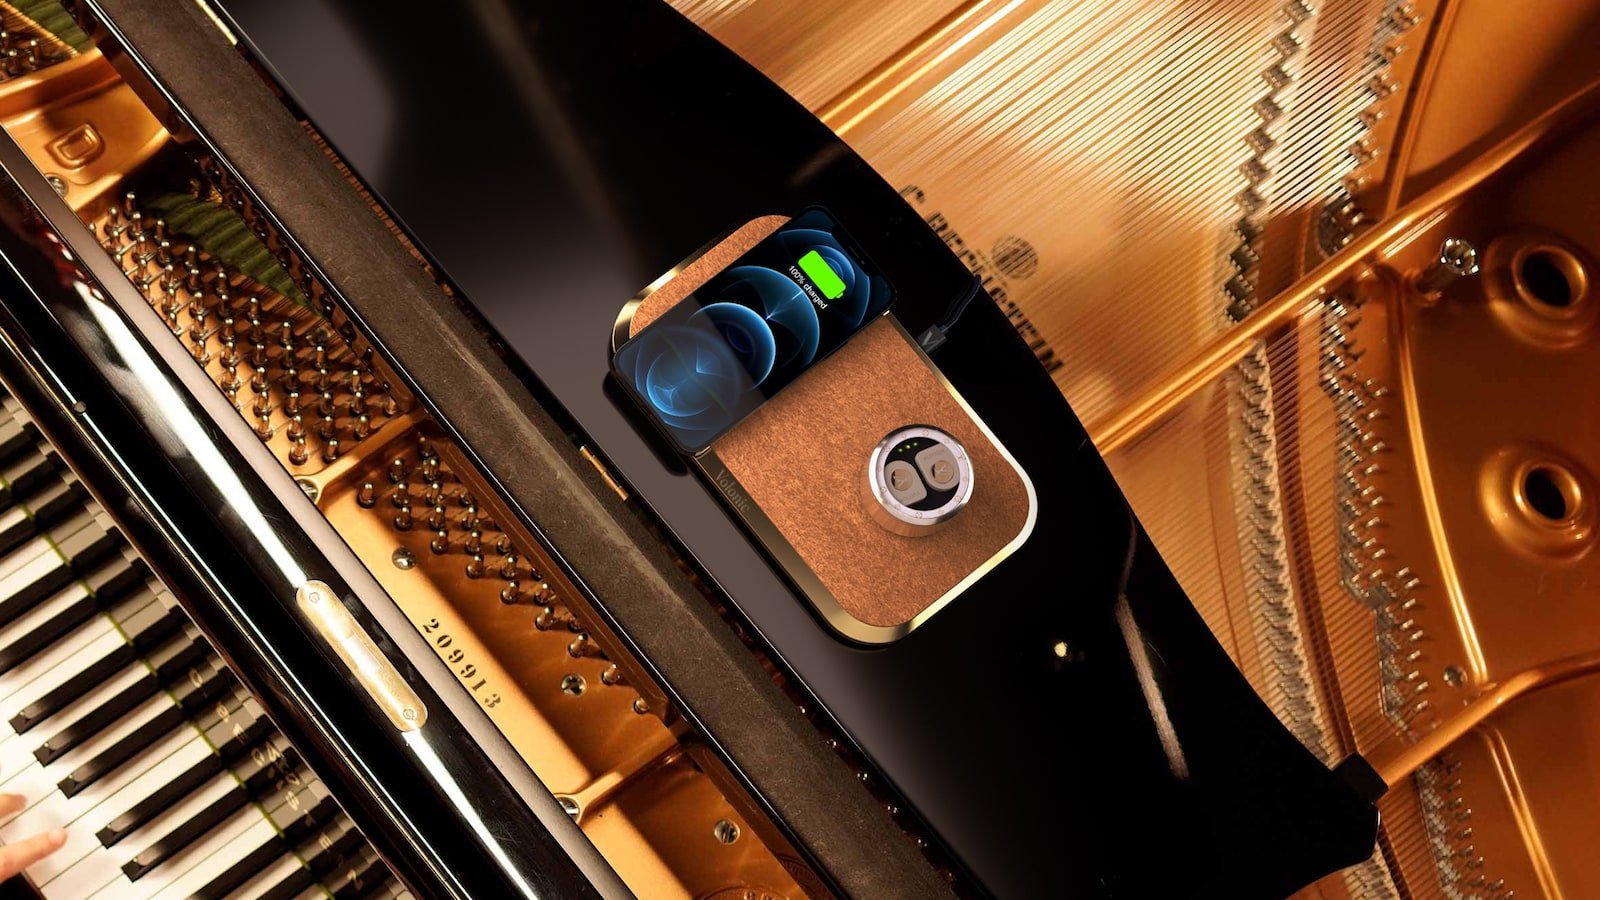 Volonic Valet 3 limited-edition wireless charging device is made of solid 18K yellow gold